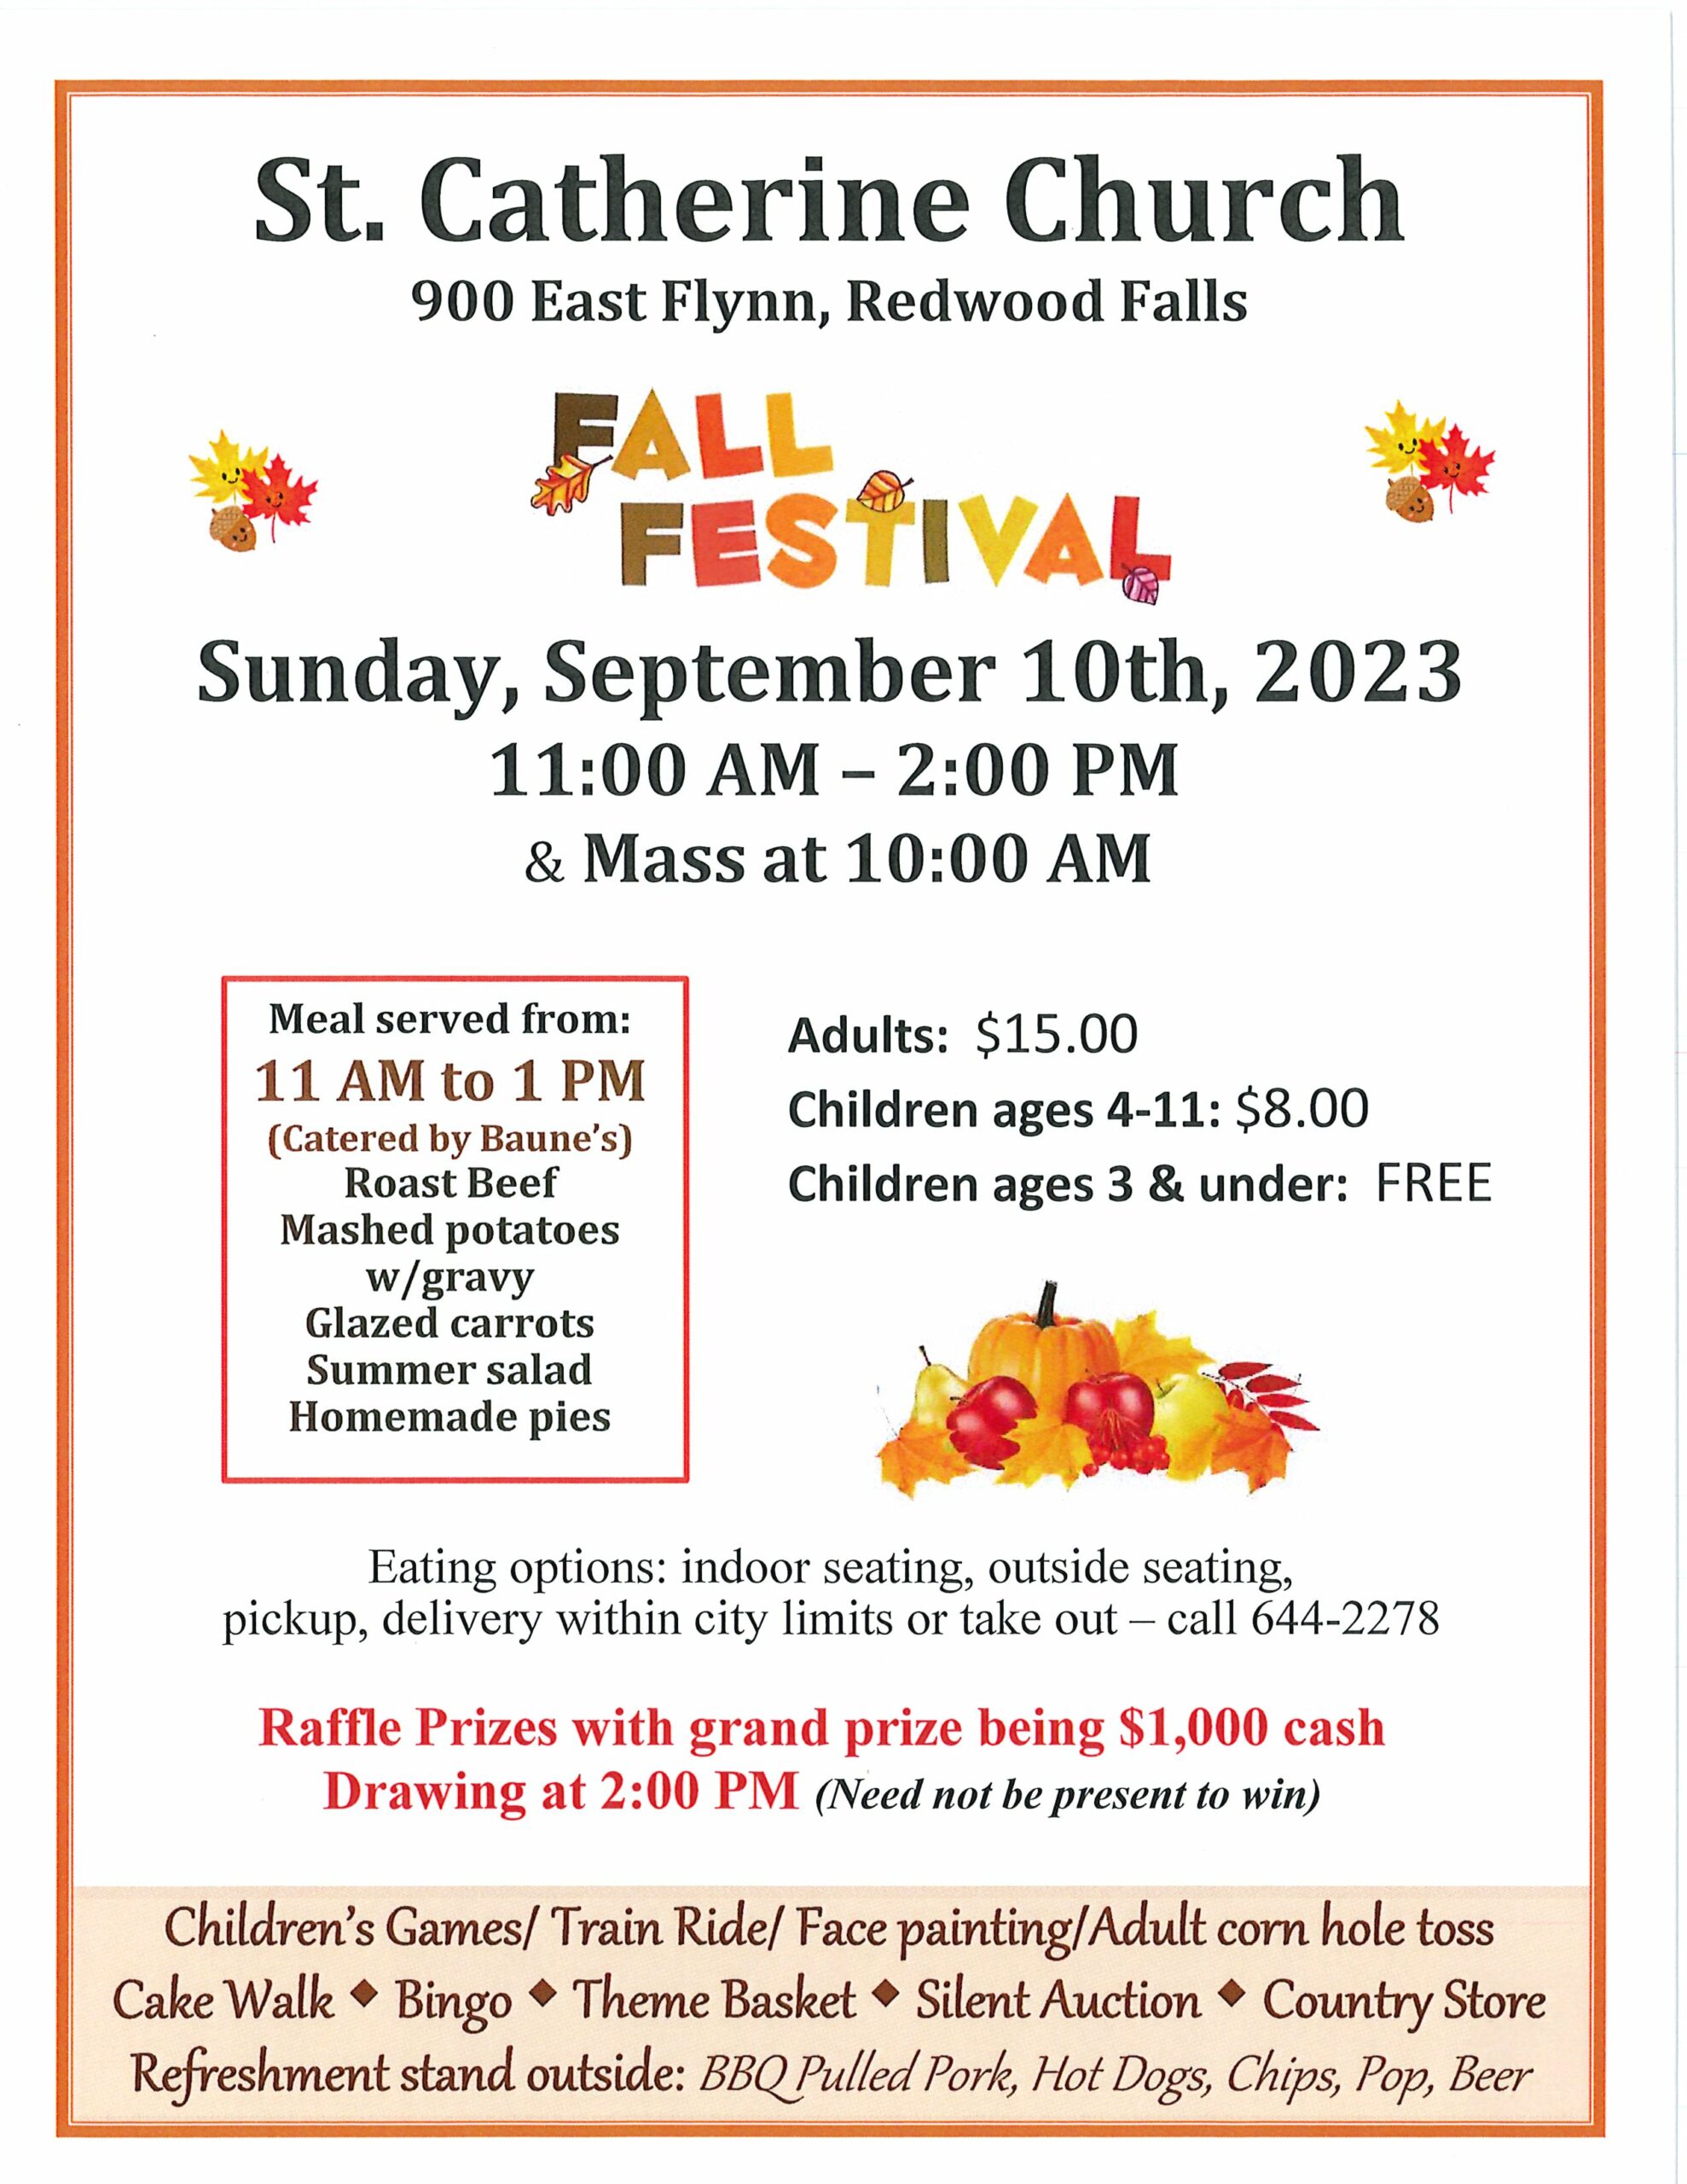 <h1 class="tribe-events-single-event-title">St, Catherine Church Fall Festival</h1>